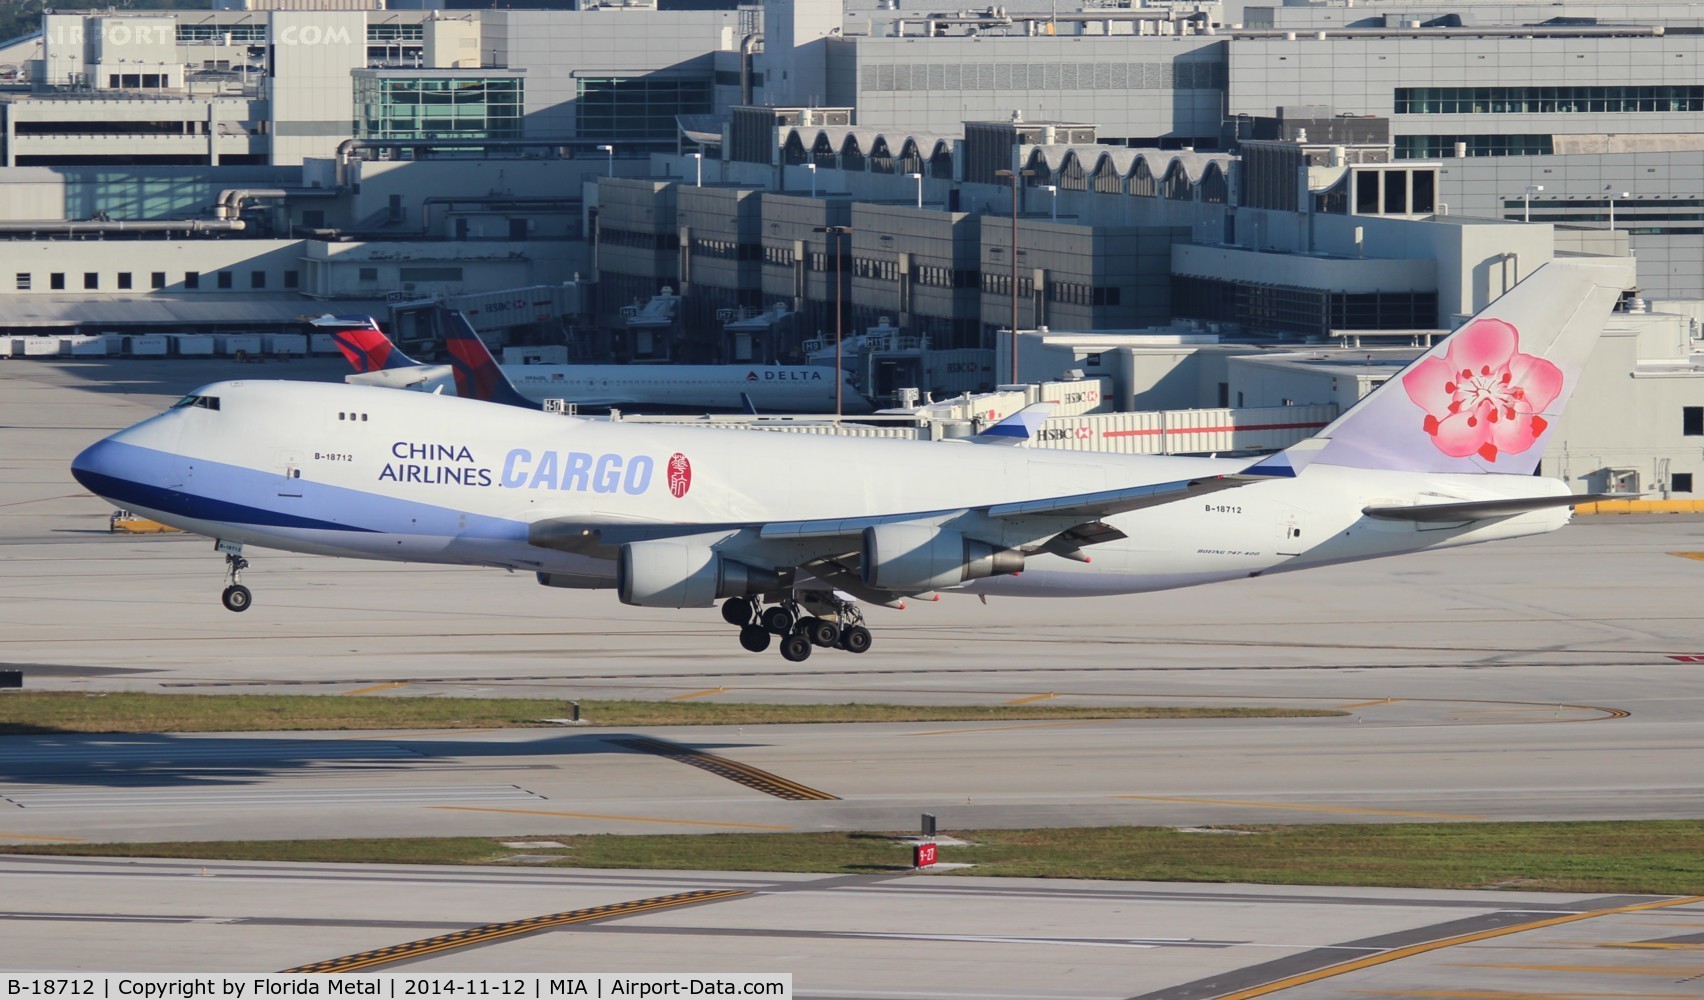 B-18712, 2003 Boeing 747-409F/SCD C/N 33729, China Airlines Cargo 747-400